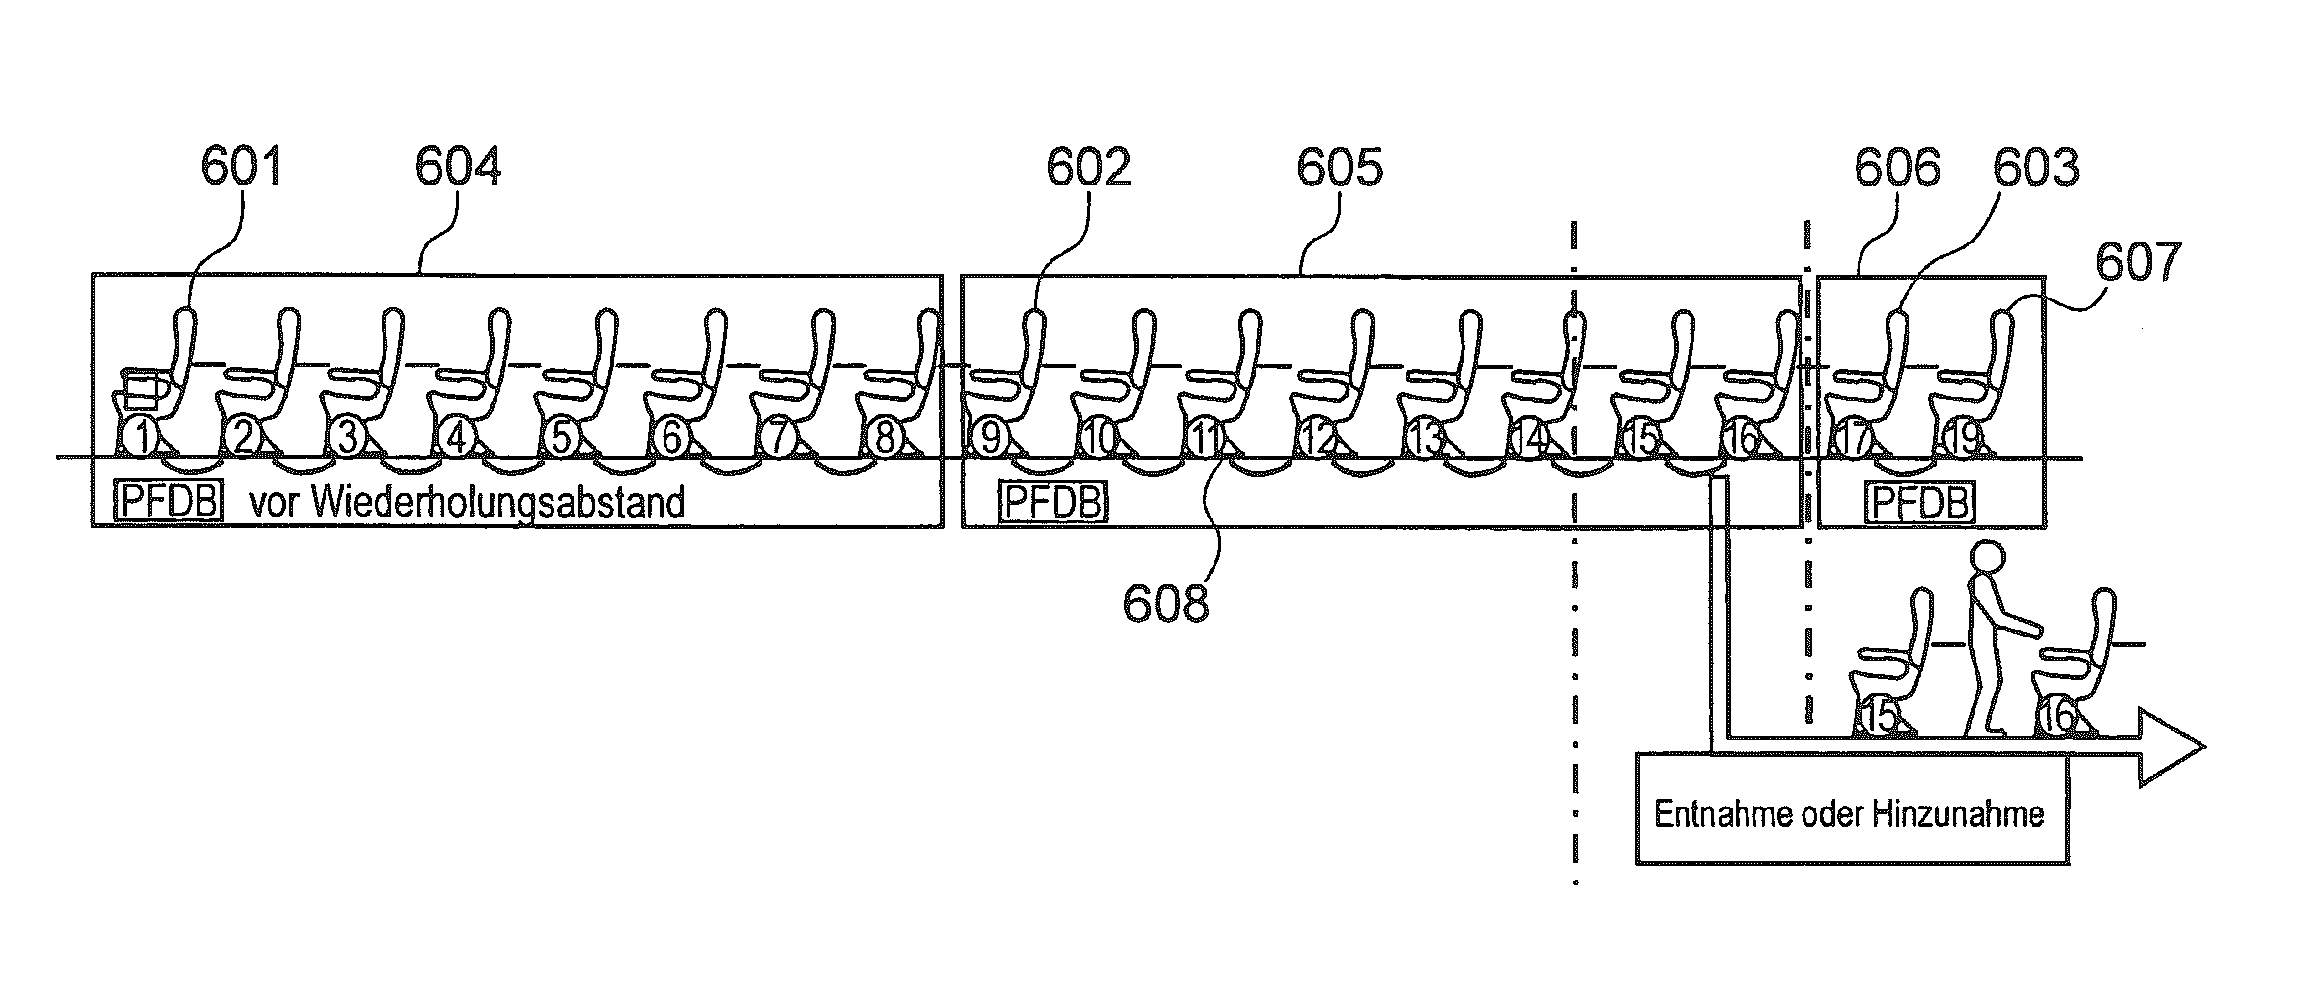 Variable Seat Separation Adjustment In An Airplane